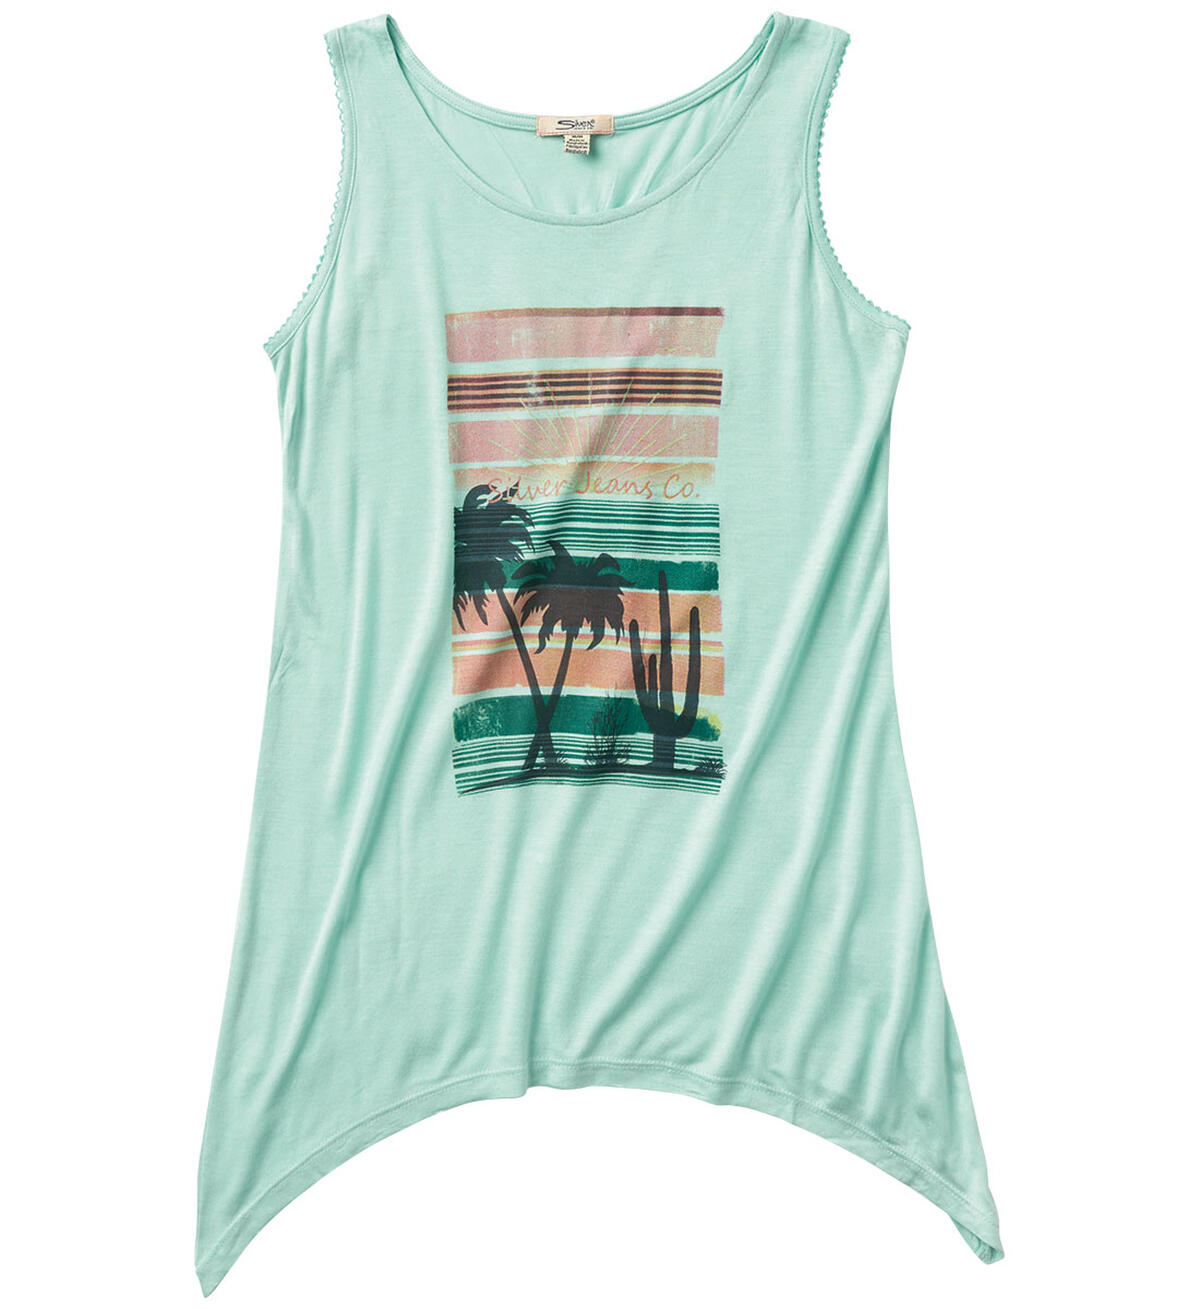 Asymmetric Graphic Tank Top (7-16), , hi-res image number 0}